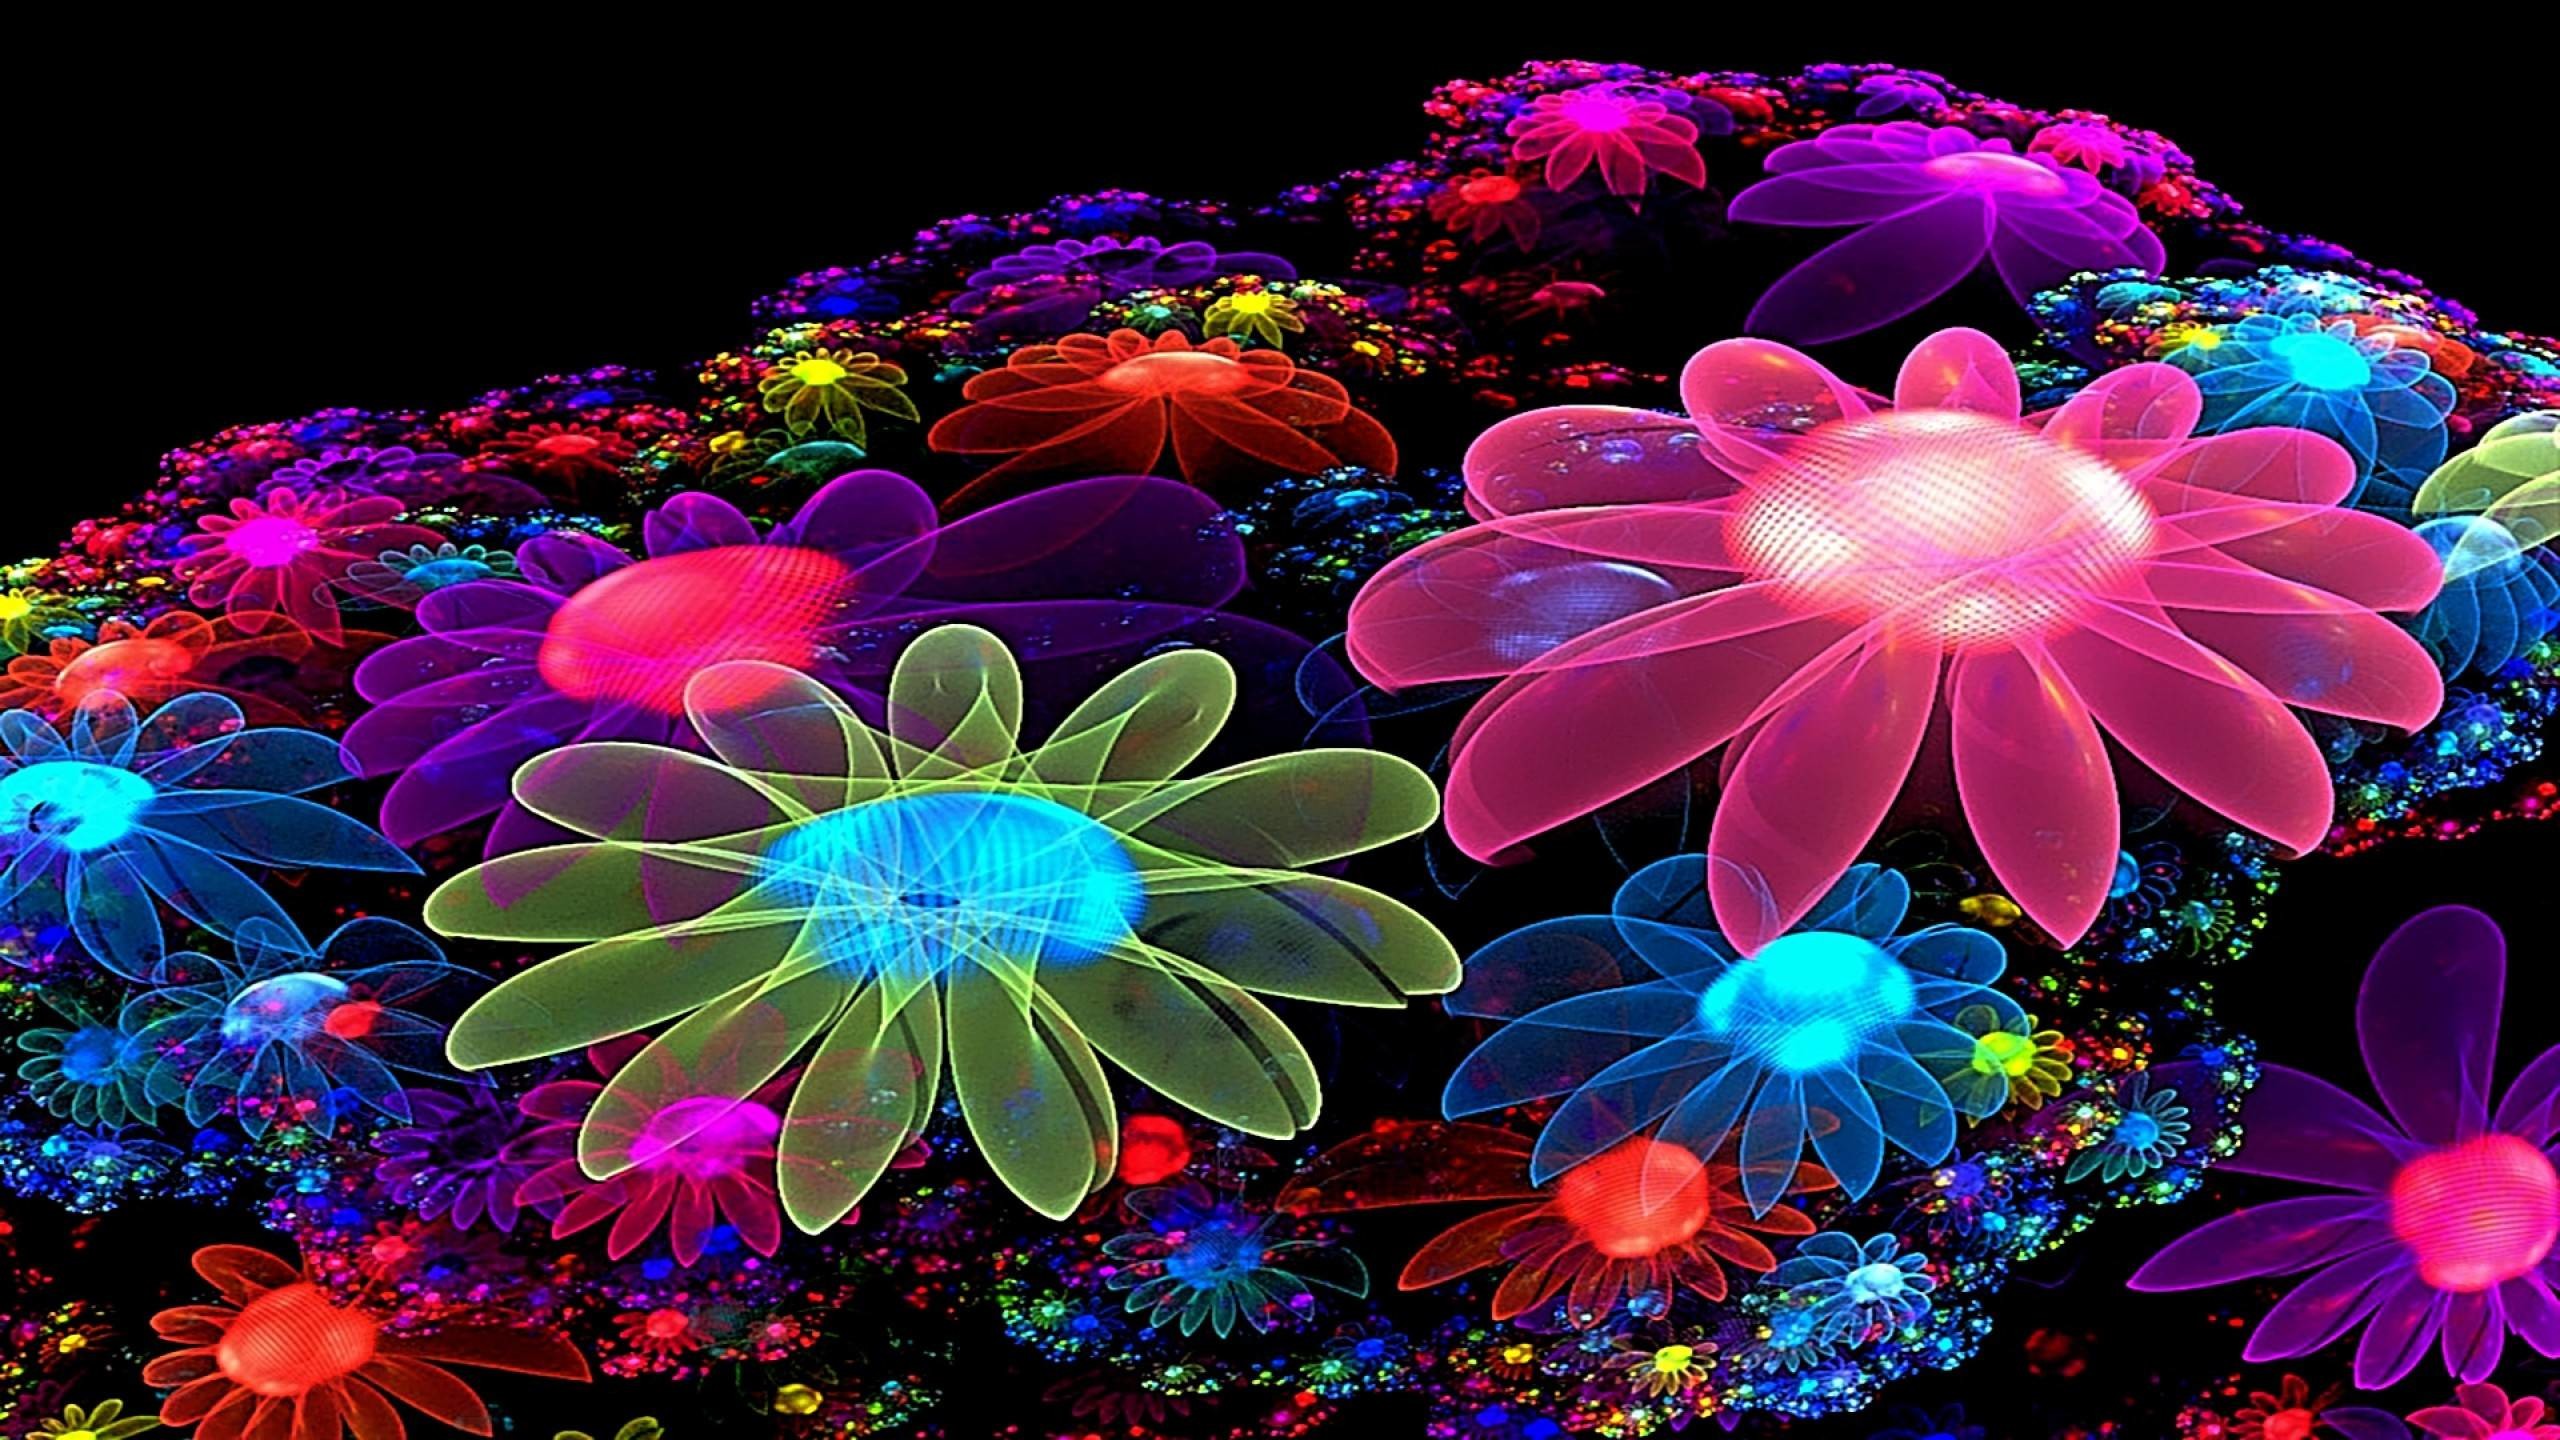 2560x1440 175921-colorful-abstract-flower-glow-wallpaper-hd.jpg